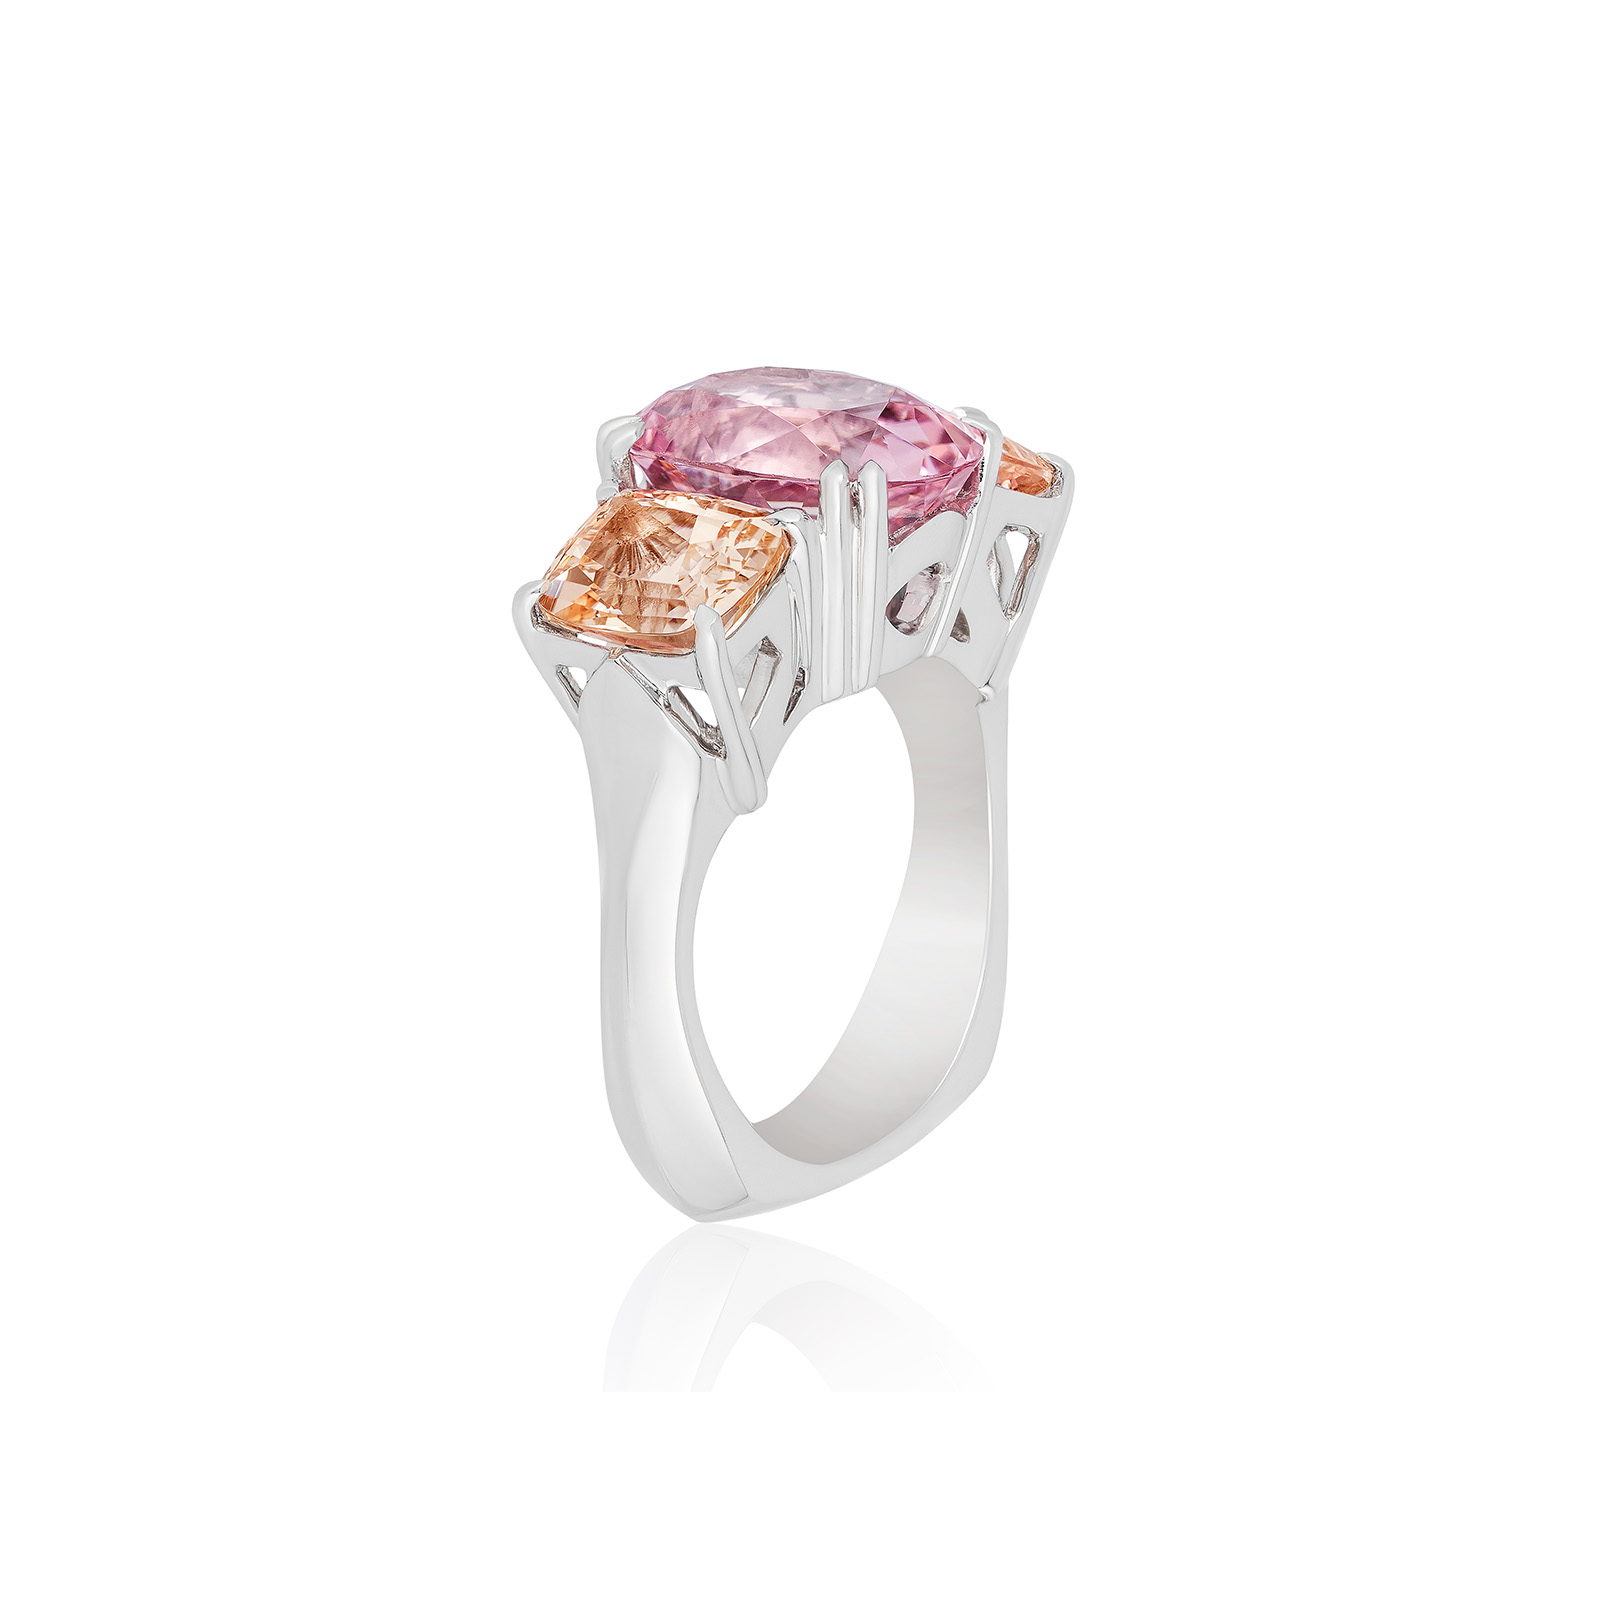 Heaven and Earth Ring Peach Topaz Pink Tourmaline Side by Cynthia Renee